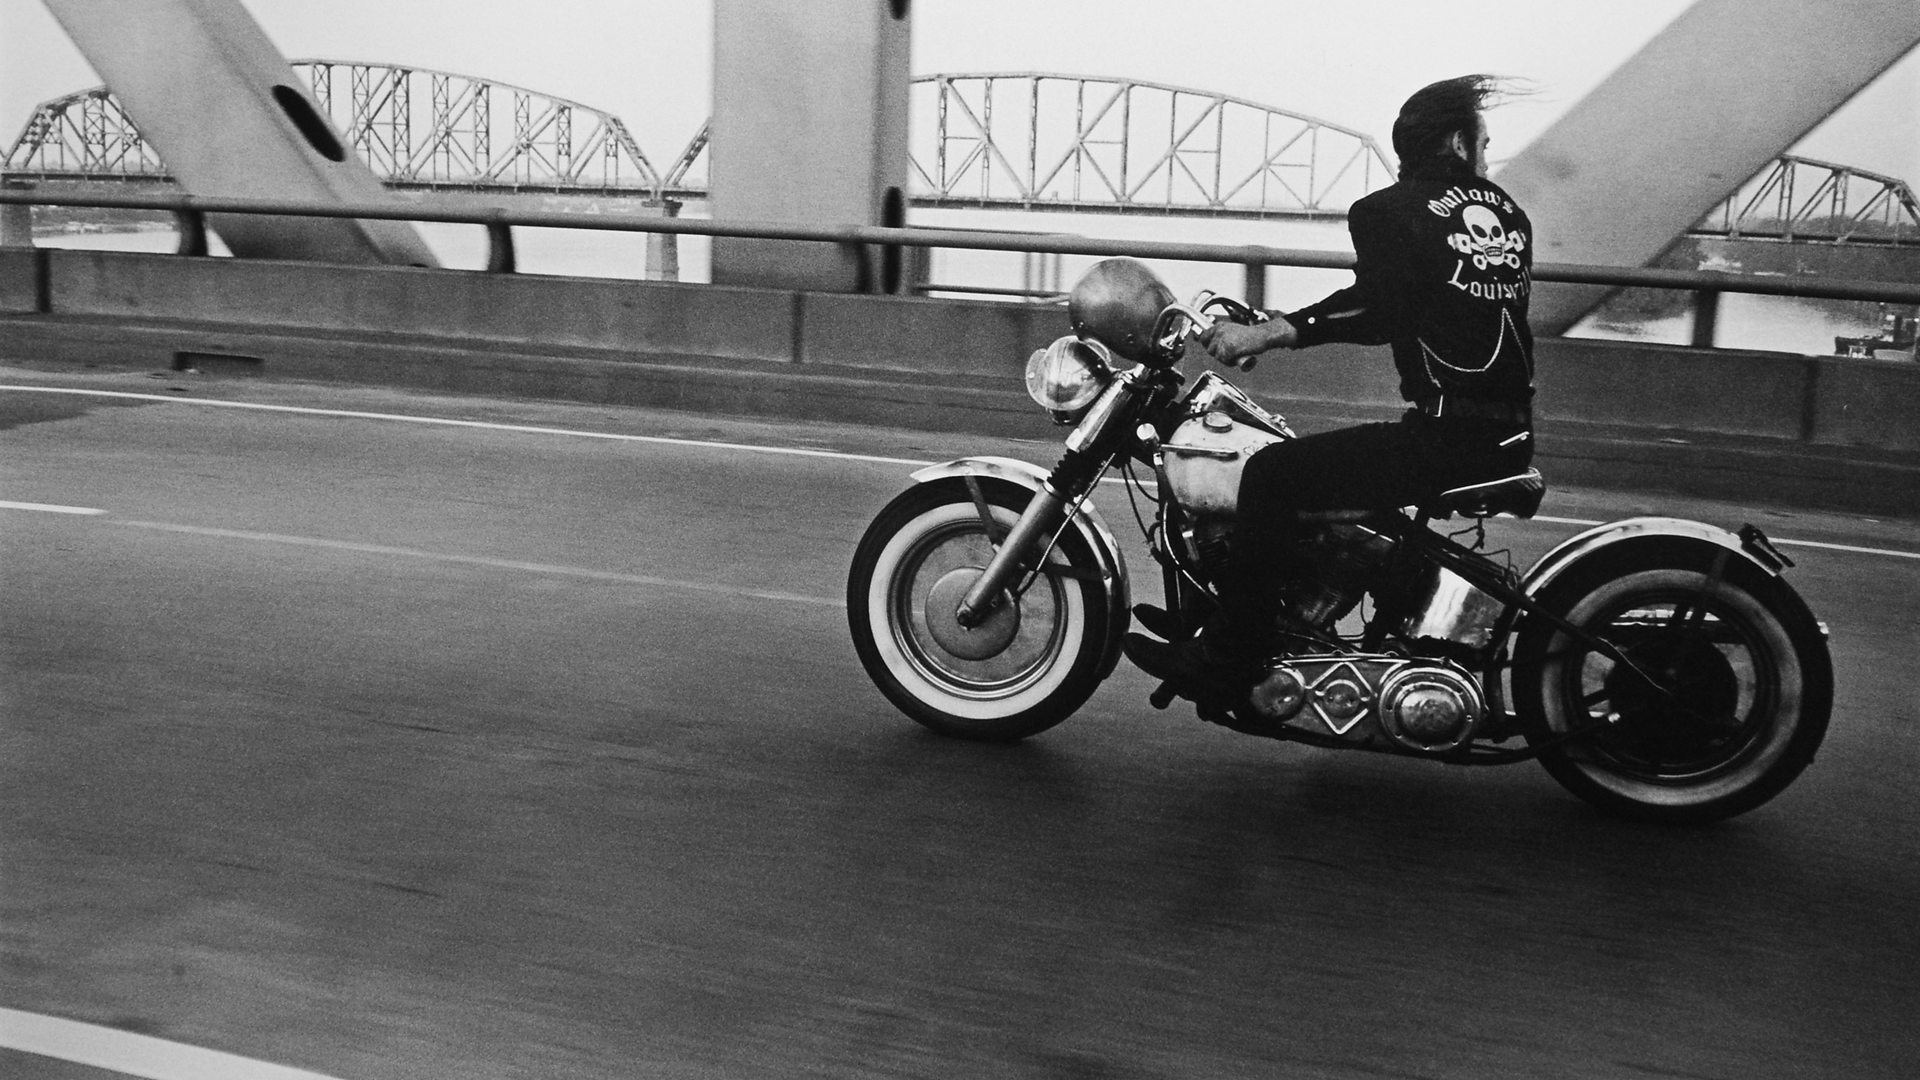 1920x1080 BBC Arts BBC Arts Chasing outlaws: How Danny Lyon changed photography